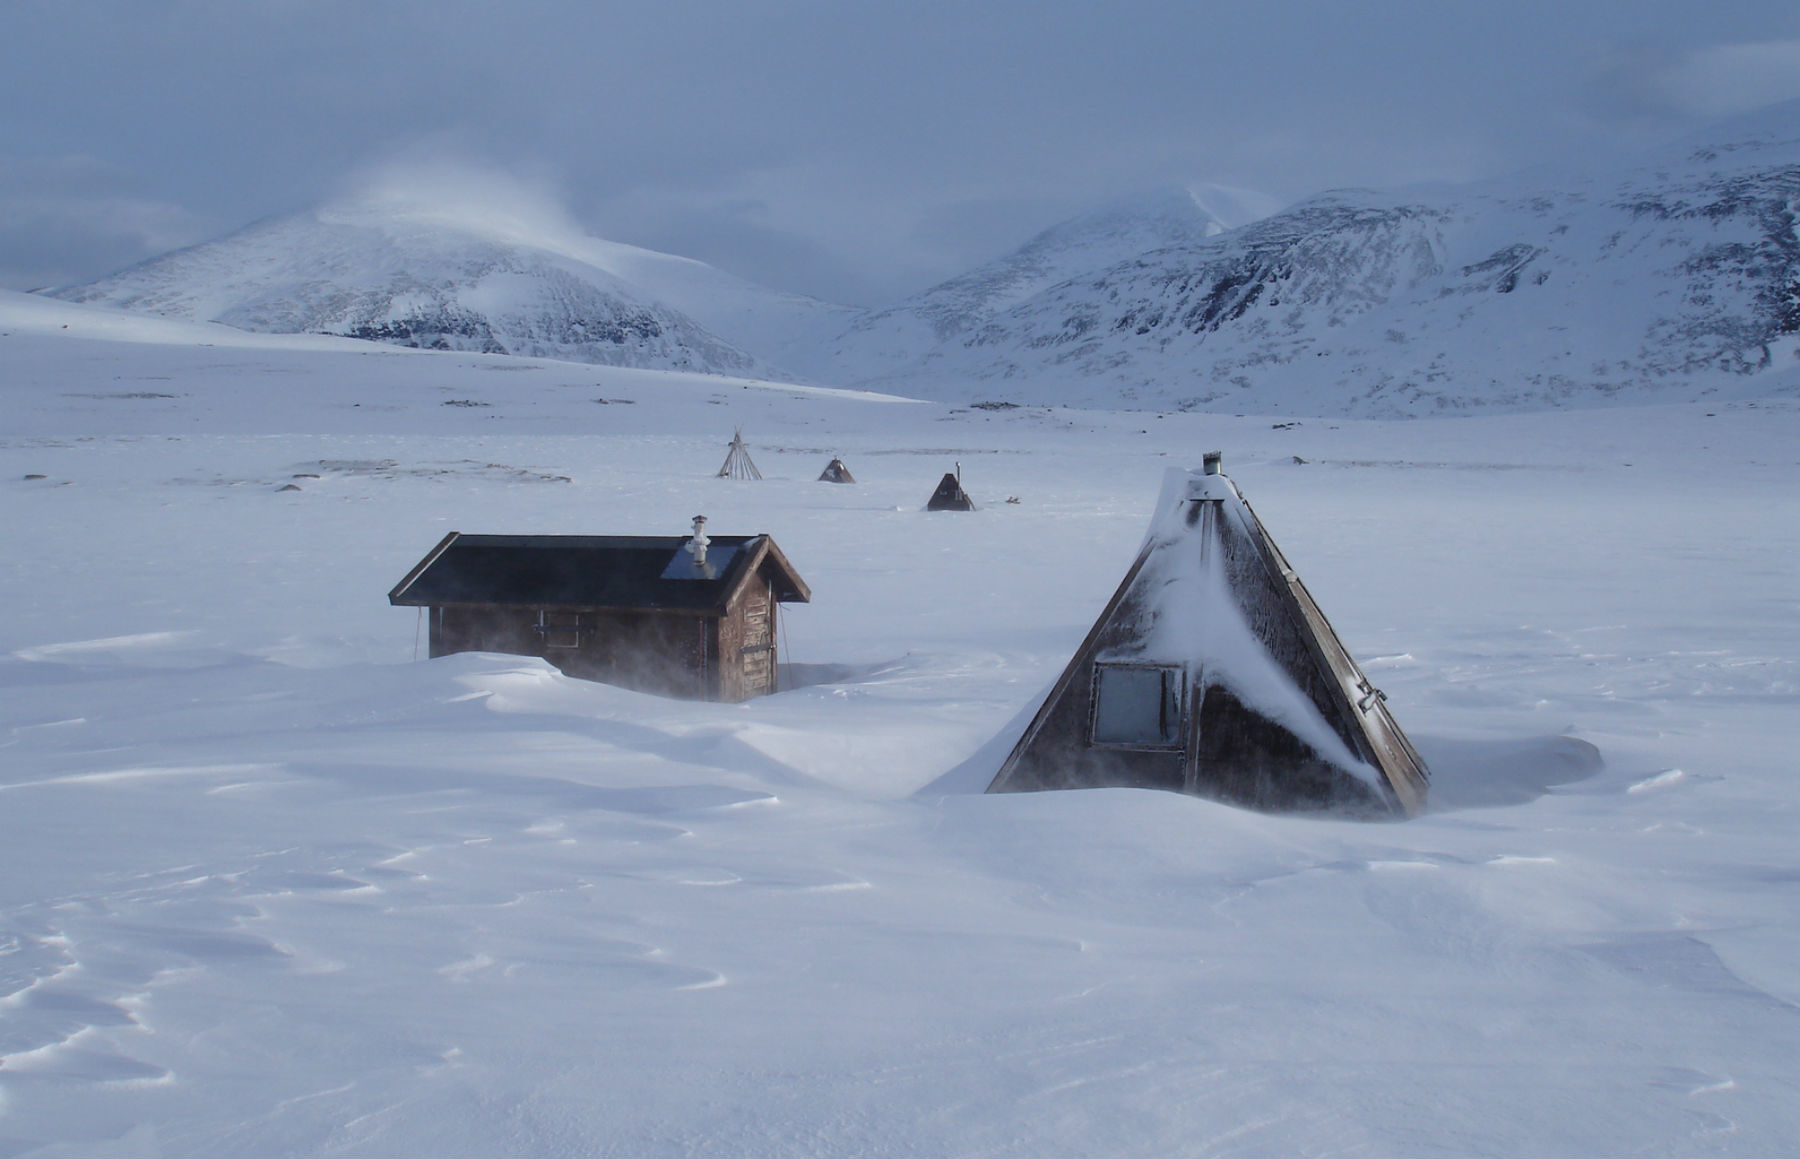 As Arctic temperatures soar, EJF prepares to meet the Sami communities affected by climate change